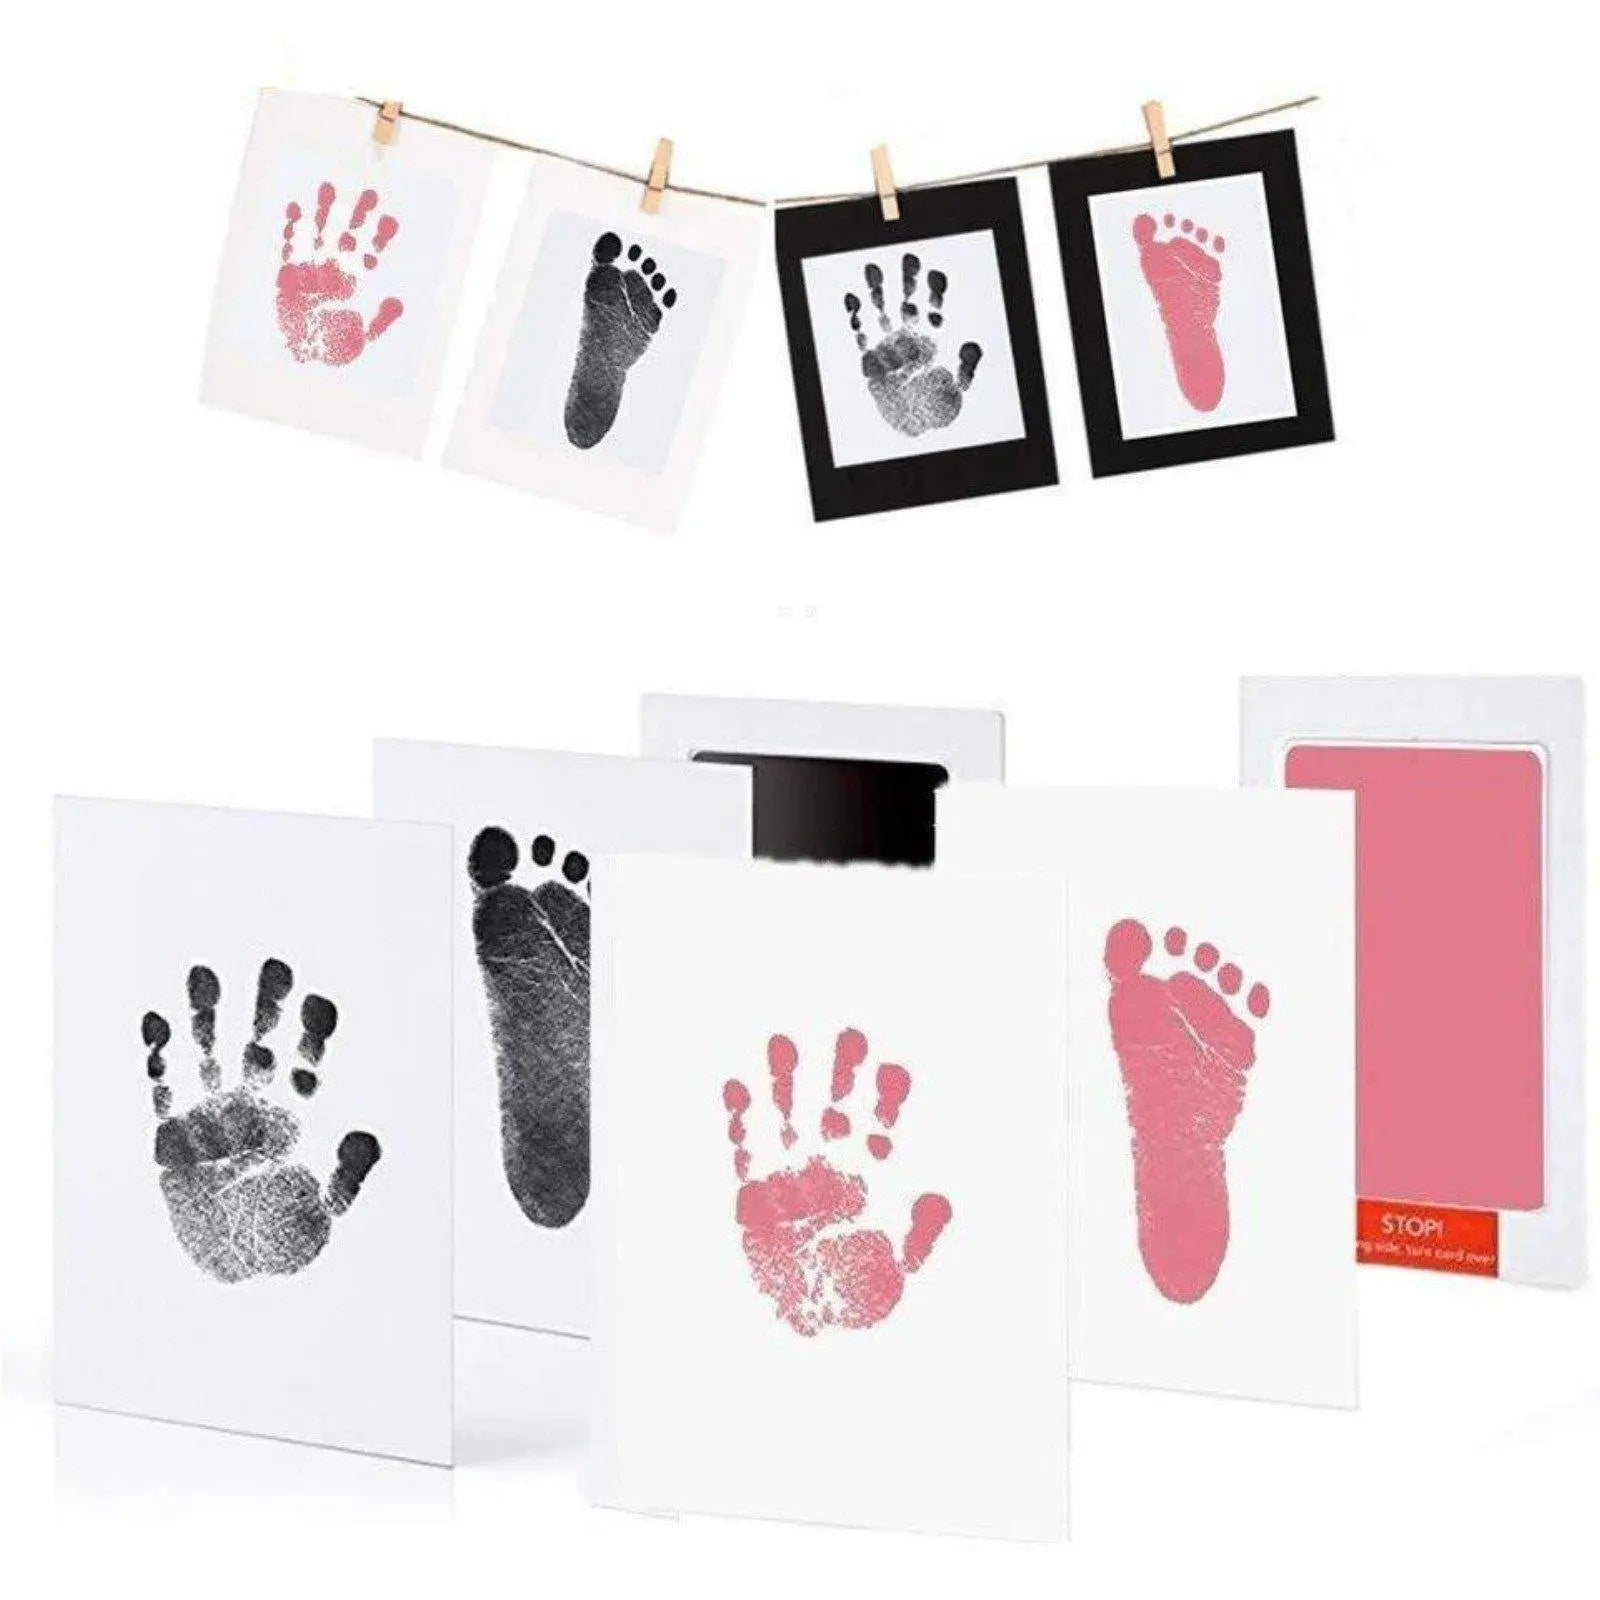 Baby Footprint Kit,Ink Pad for Baby Hand and Footprints - Dog Paw Print Kit,Clean Touch Baby Foot Printing Kit, Newborn Baby Handprint Kit with 4